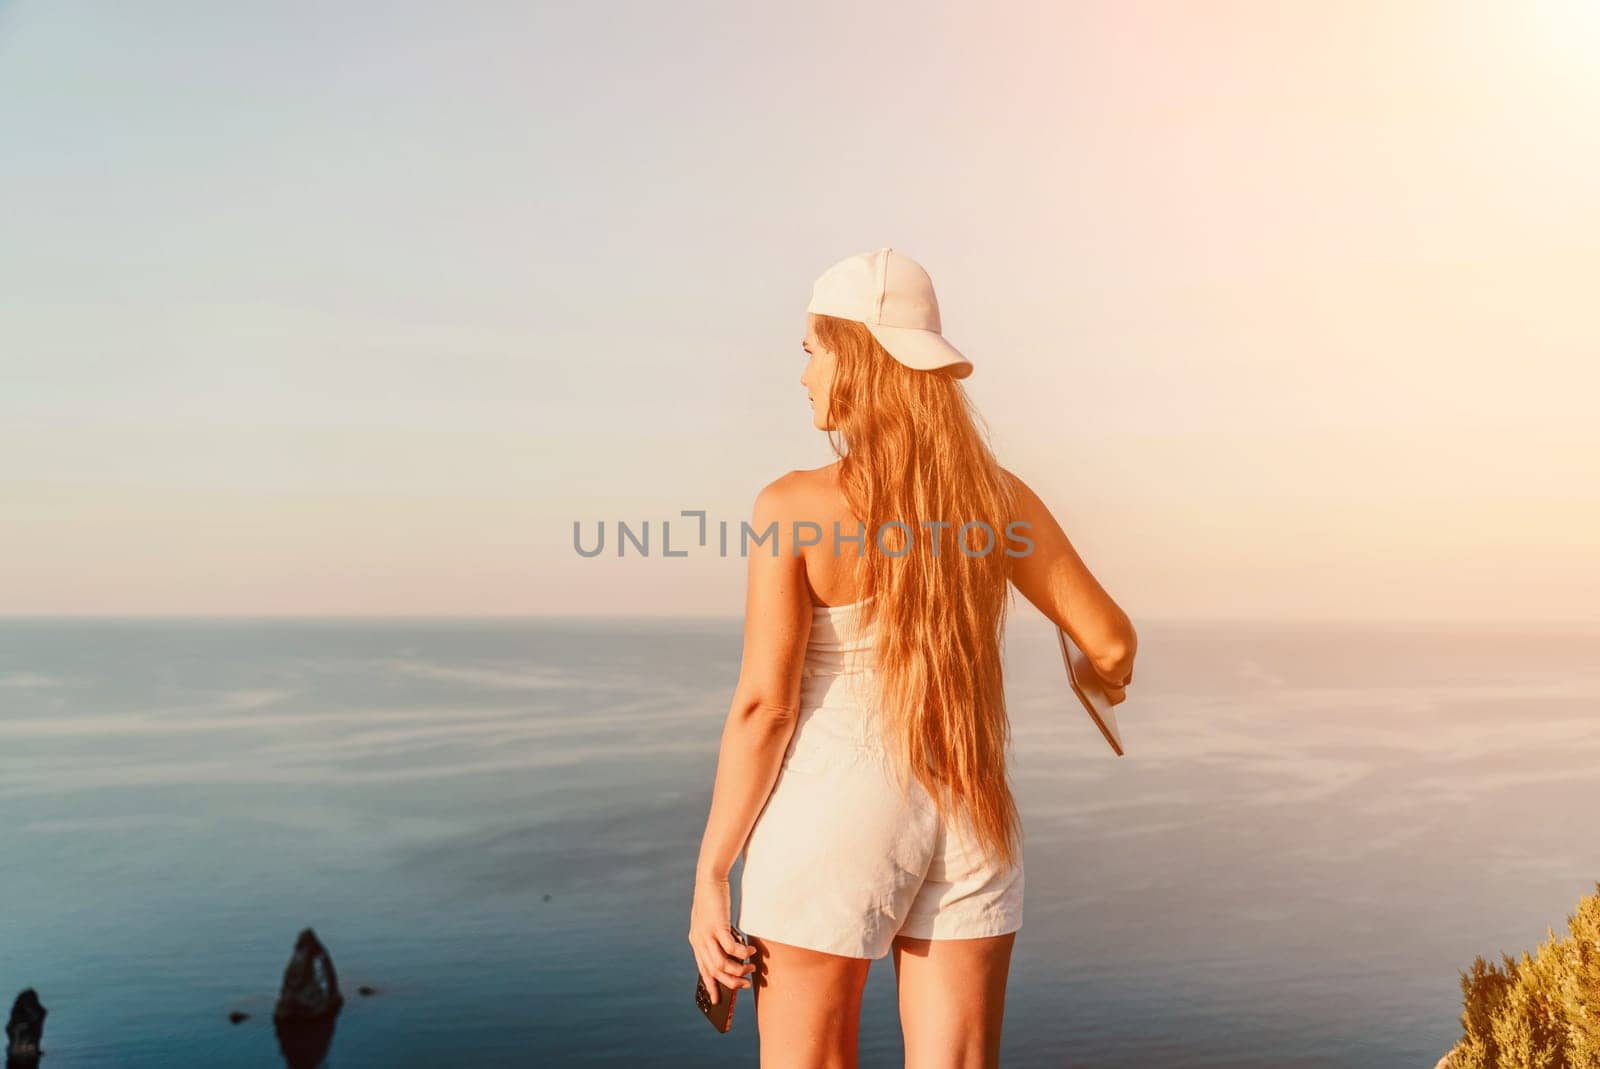 A female tourist stands by the sea wearing a white cap and T-shirt, looking happy and relaxed